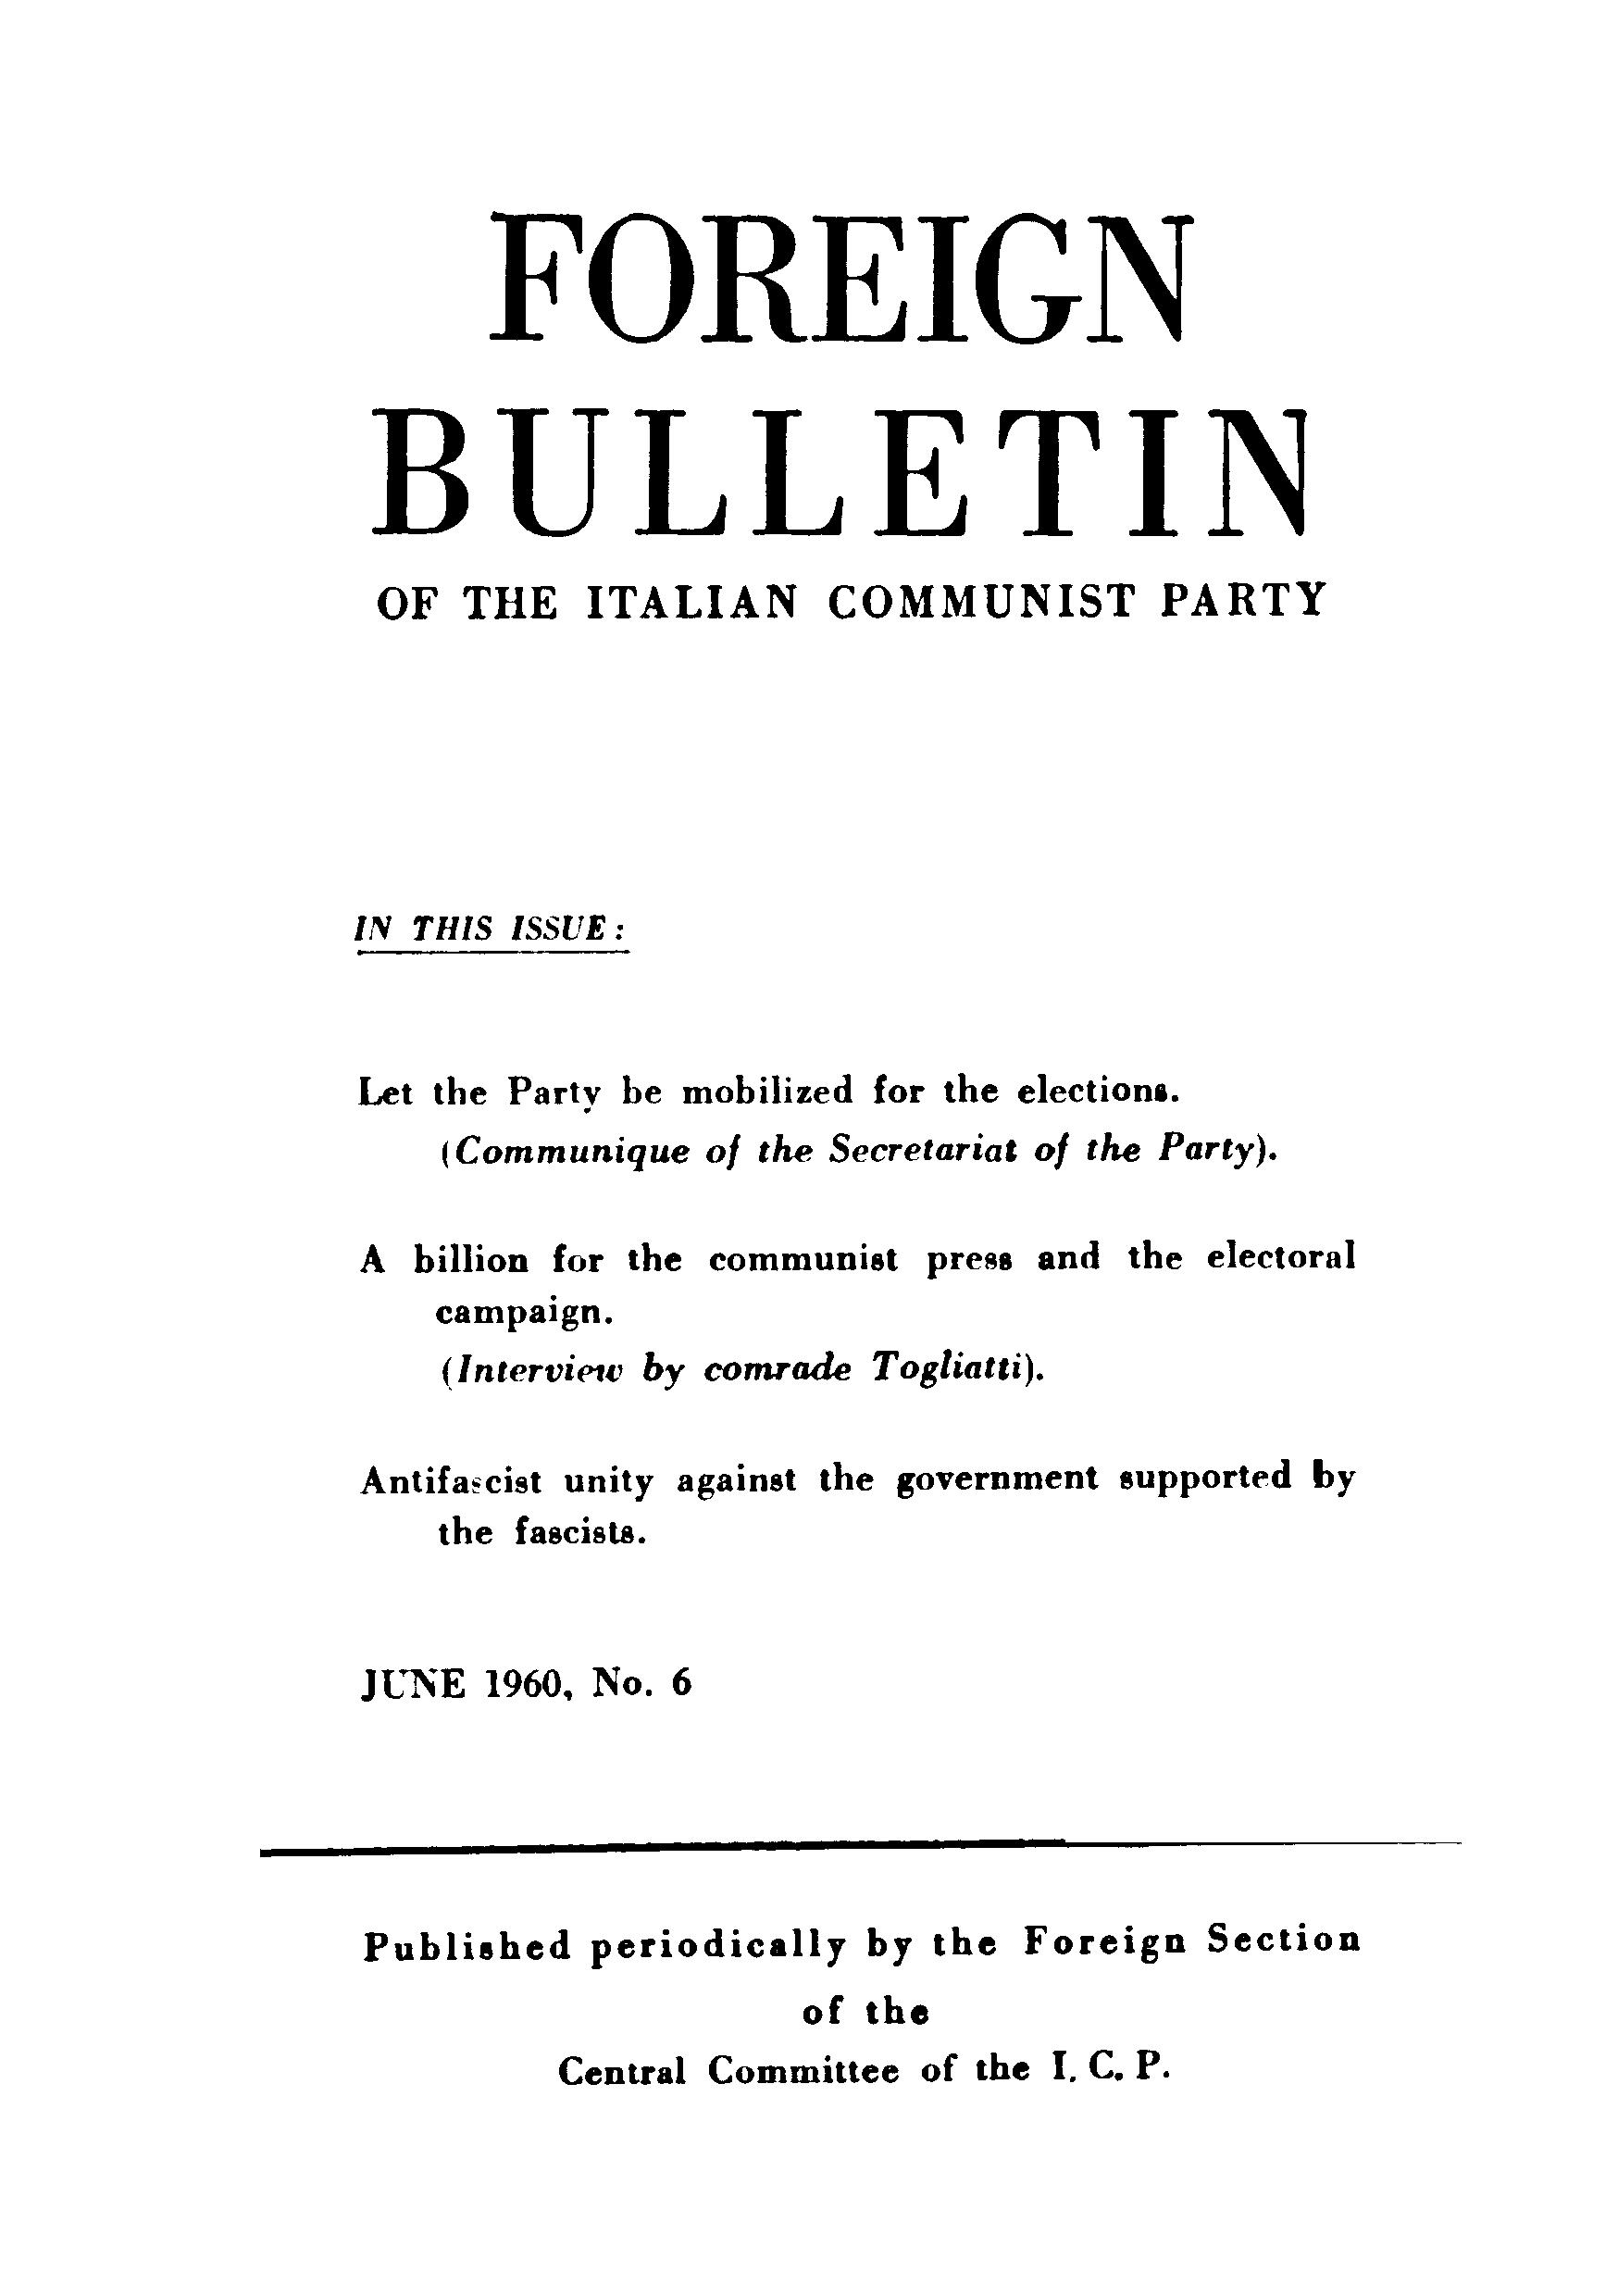 FOREIGN BULLETIN OF THE ITALIAN COMMUNIST PARTY